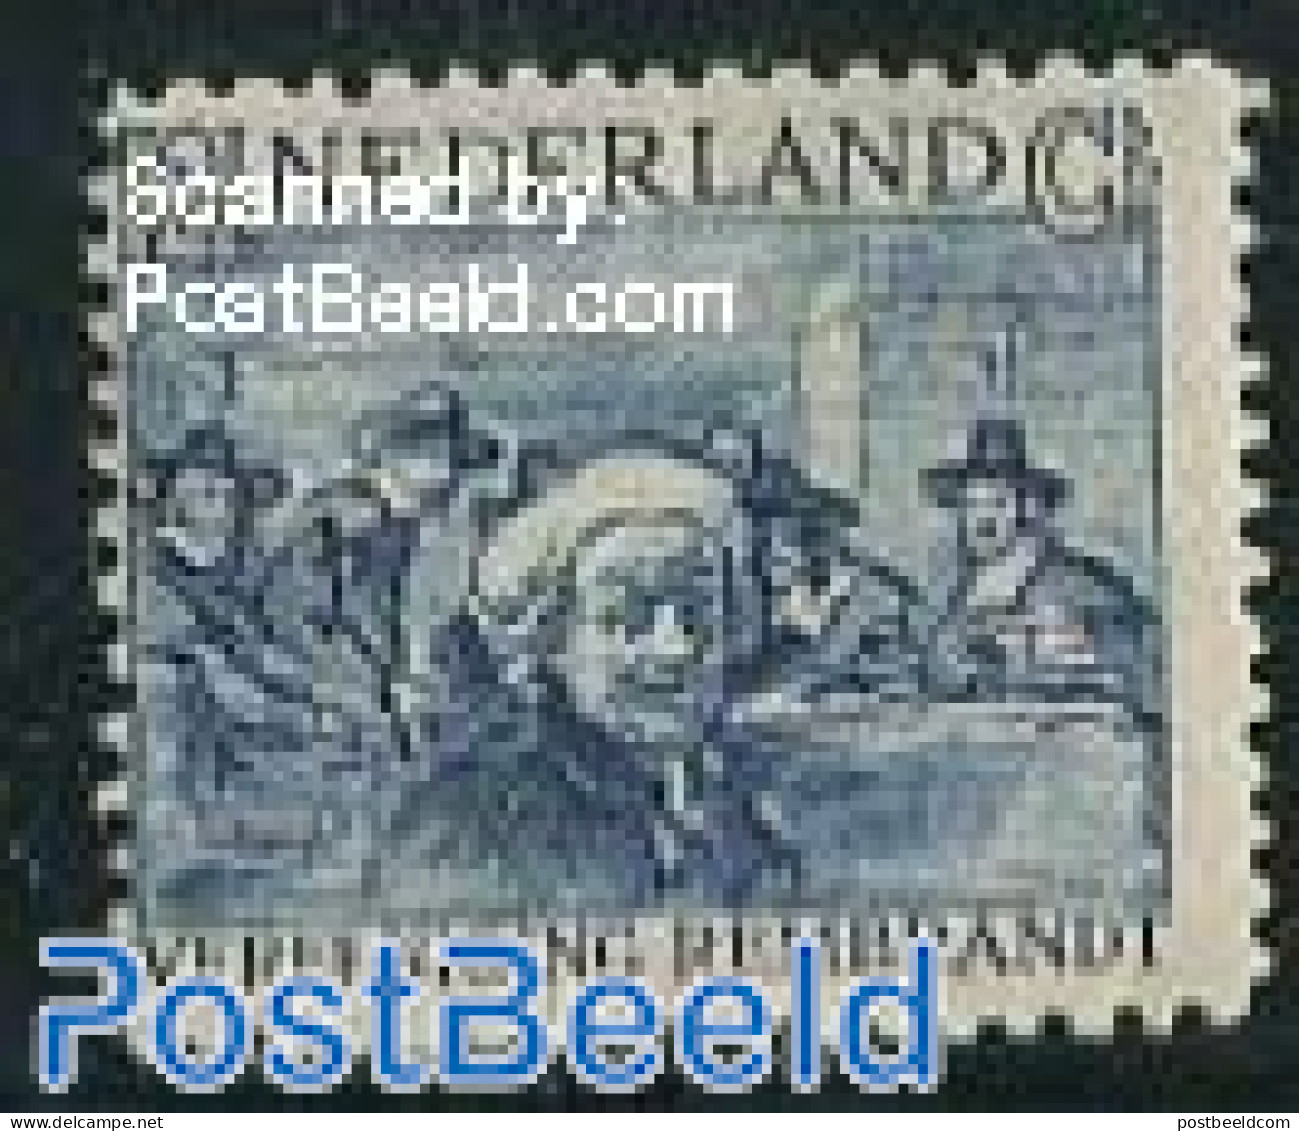 Netherlands 1930 12.5+5c, Rembrandt, Stamp Out Of Set, Mint NH, Art - Paintings - Rembrandt - Self Portraits - Ungebraucht